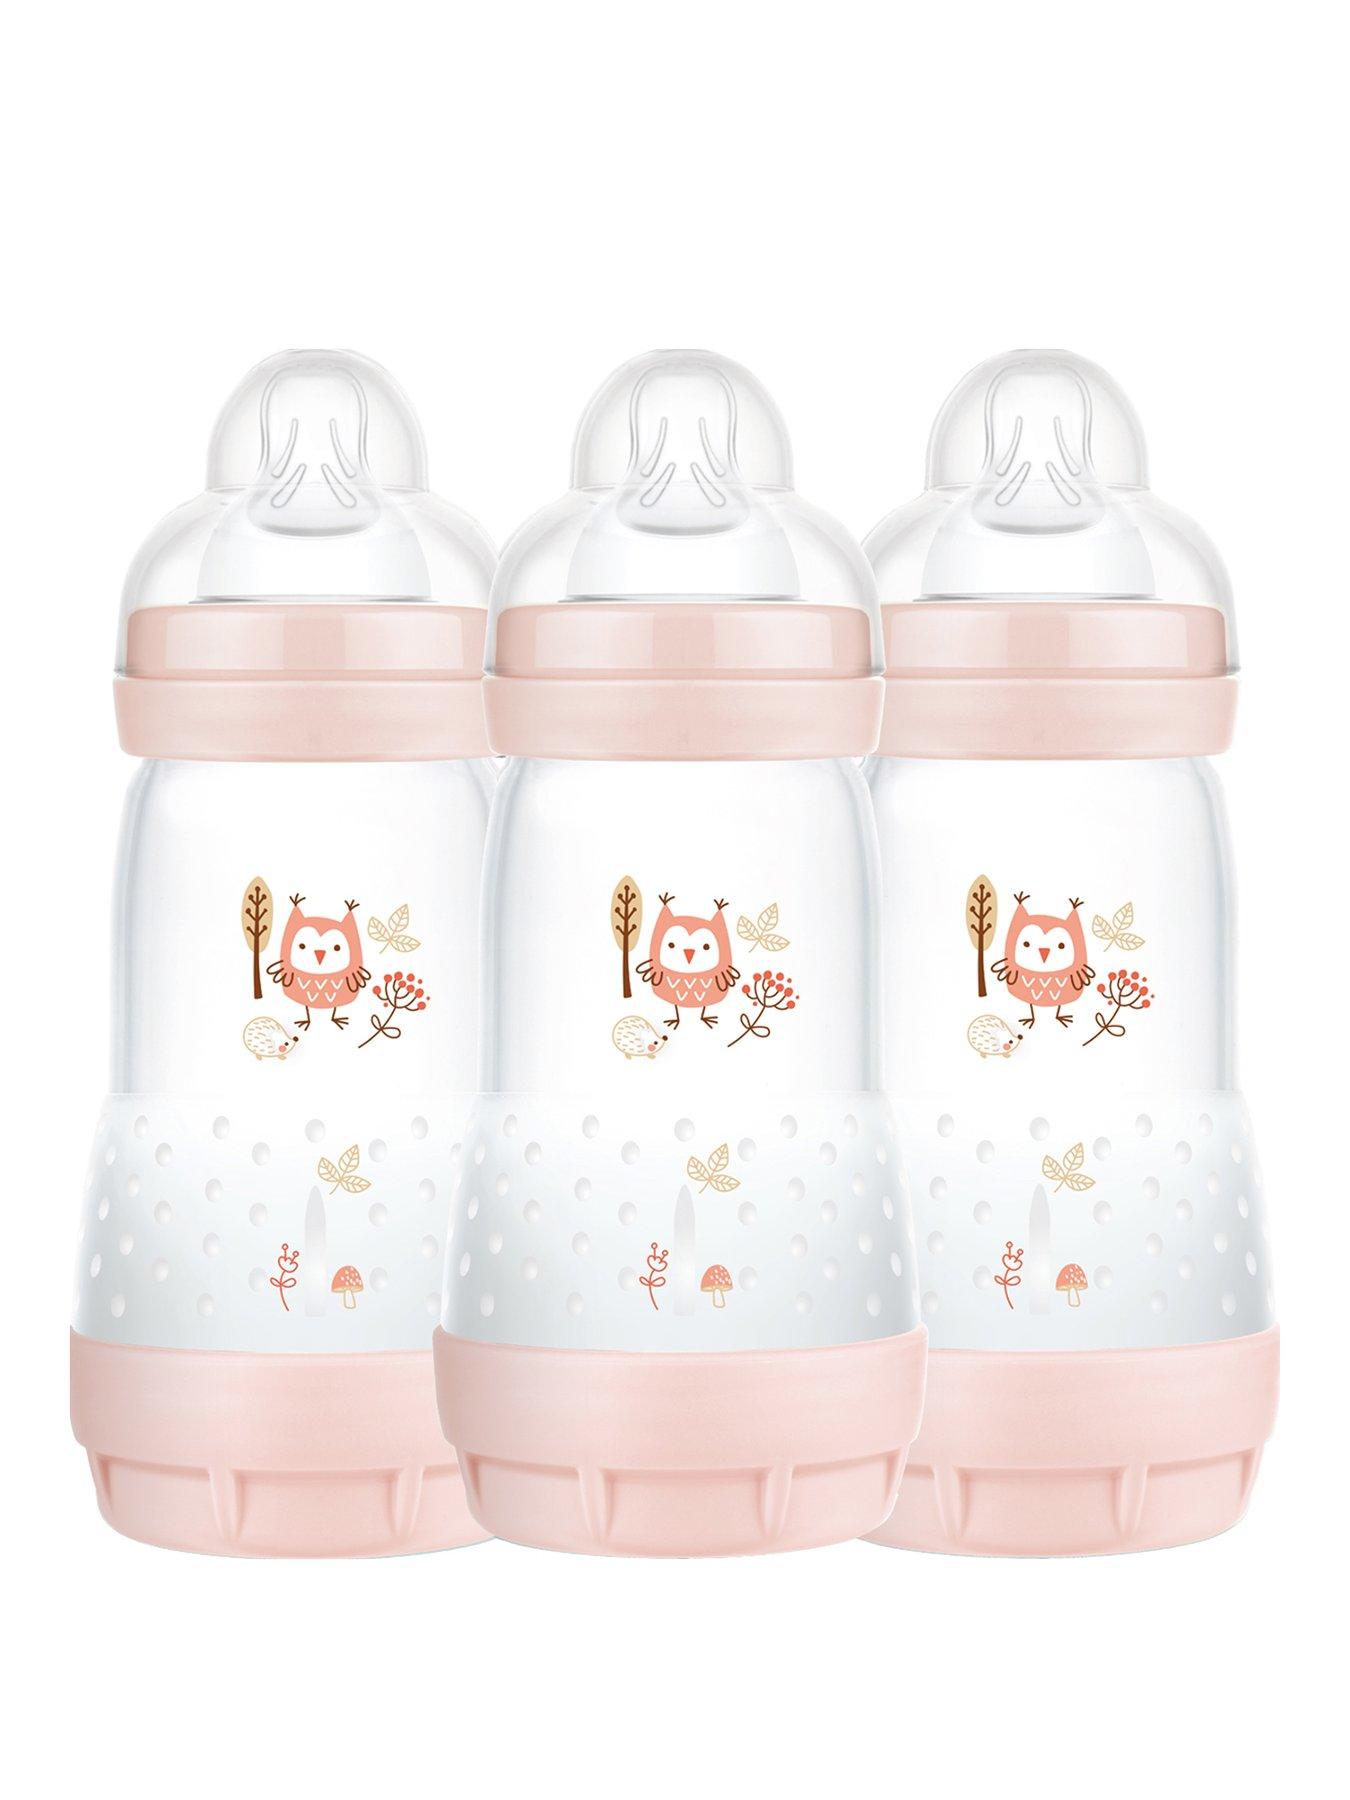 NUK Disney First Choice+ First Years Set, 0+ Months, Temperature Control, 2  x 300 ml Bottles, 1 x Learner Cup, 2 x Soothers, 2 Teats, Anti-colic Vent,  BPA-Free, Winnie-the-Pooh, 7 Count 